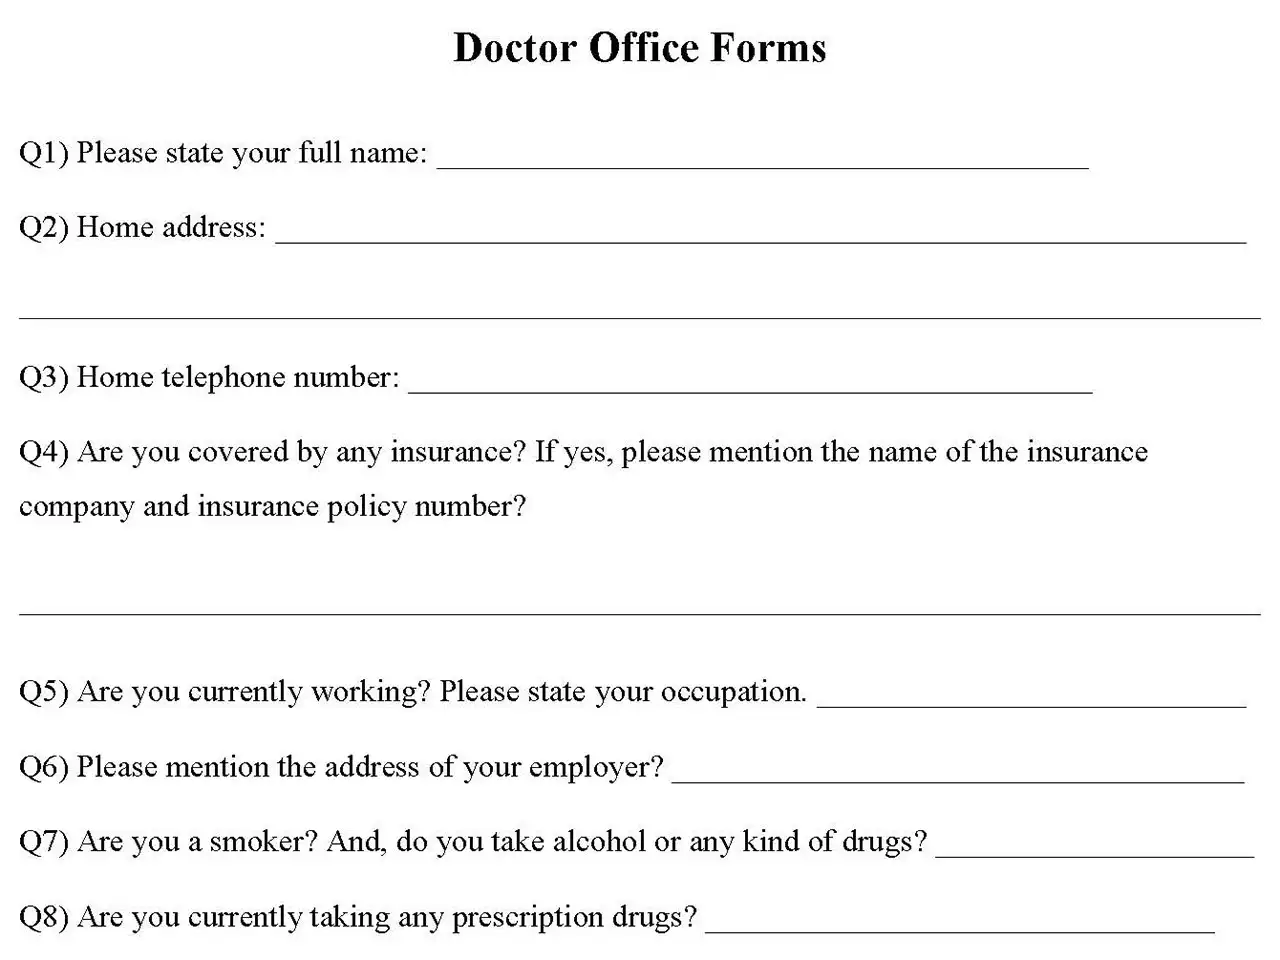 Doctor Office Form